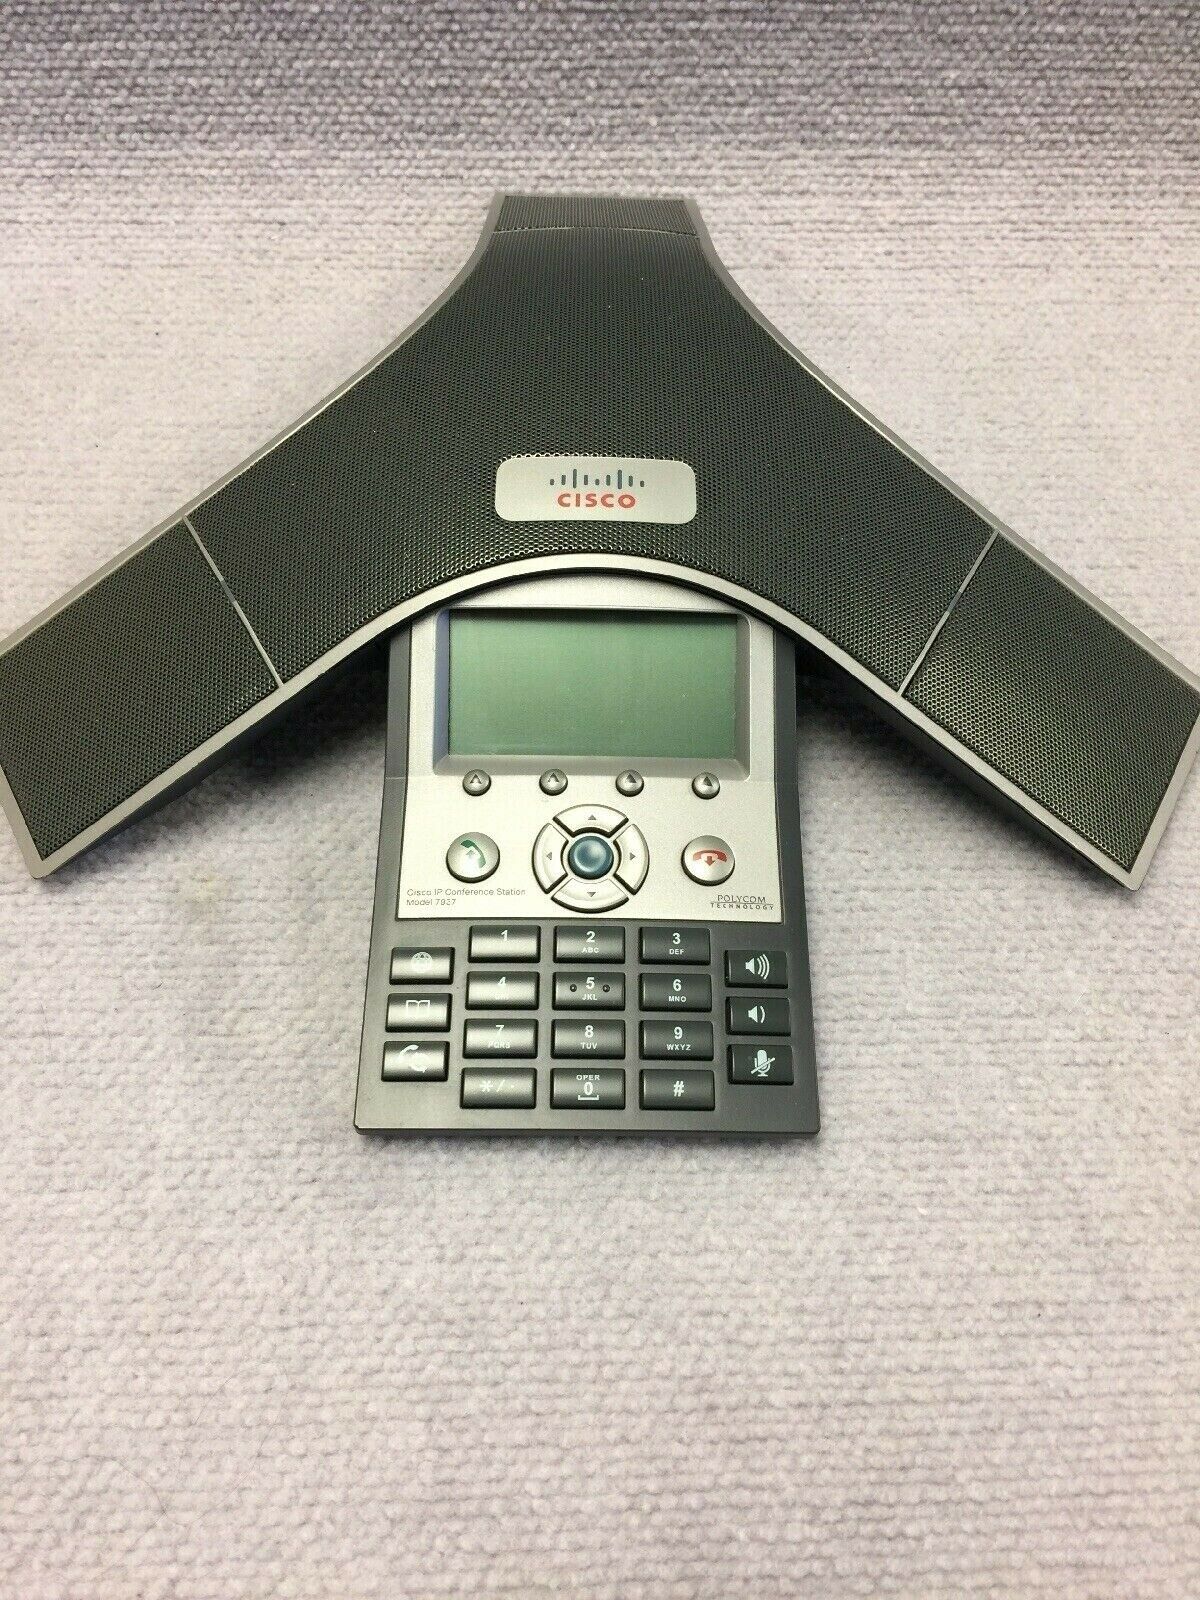 Cisco Polycom 7937 Ip Conference Station Uc Phone 7937 Voip 2201-40100-001